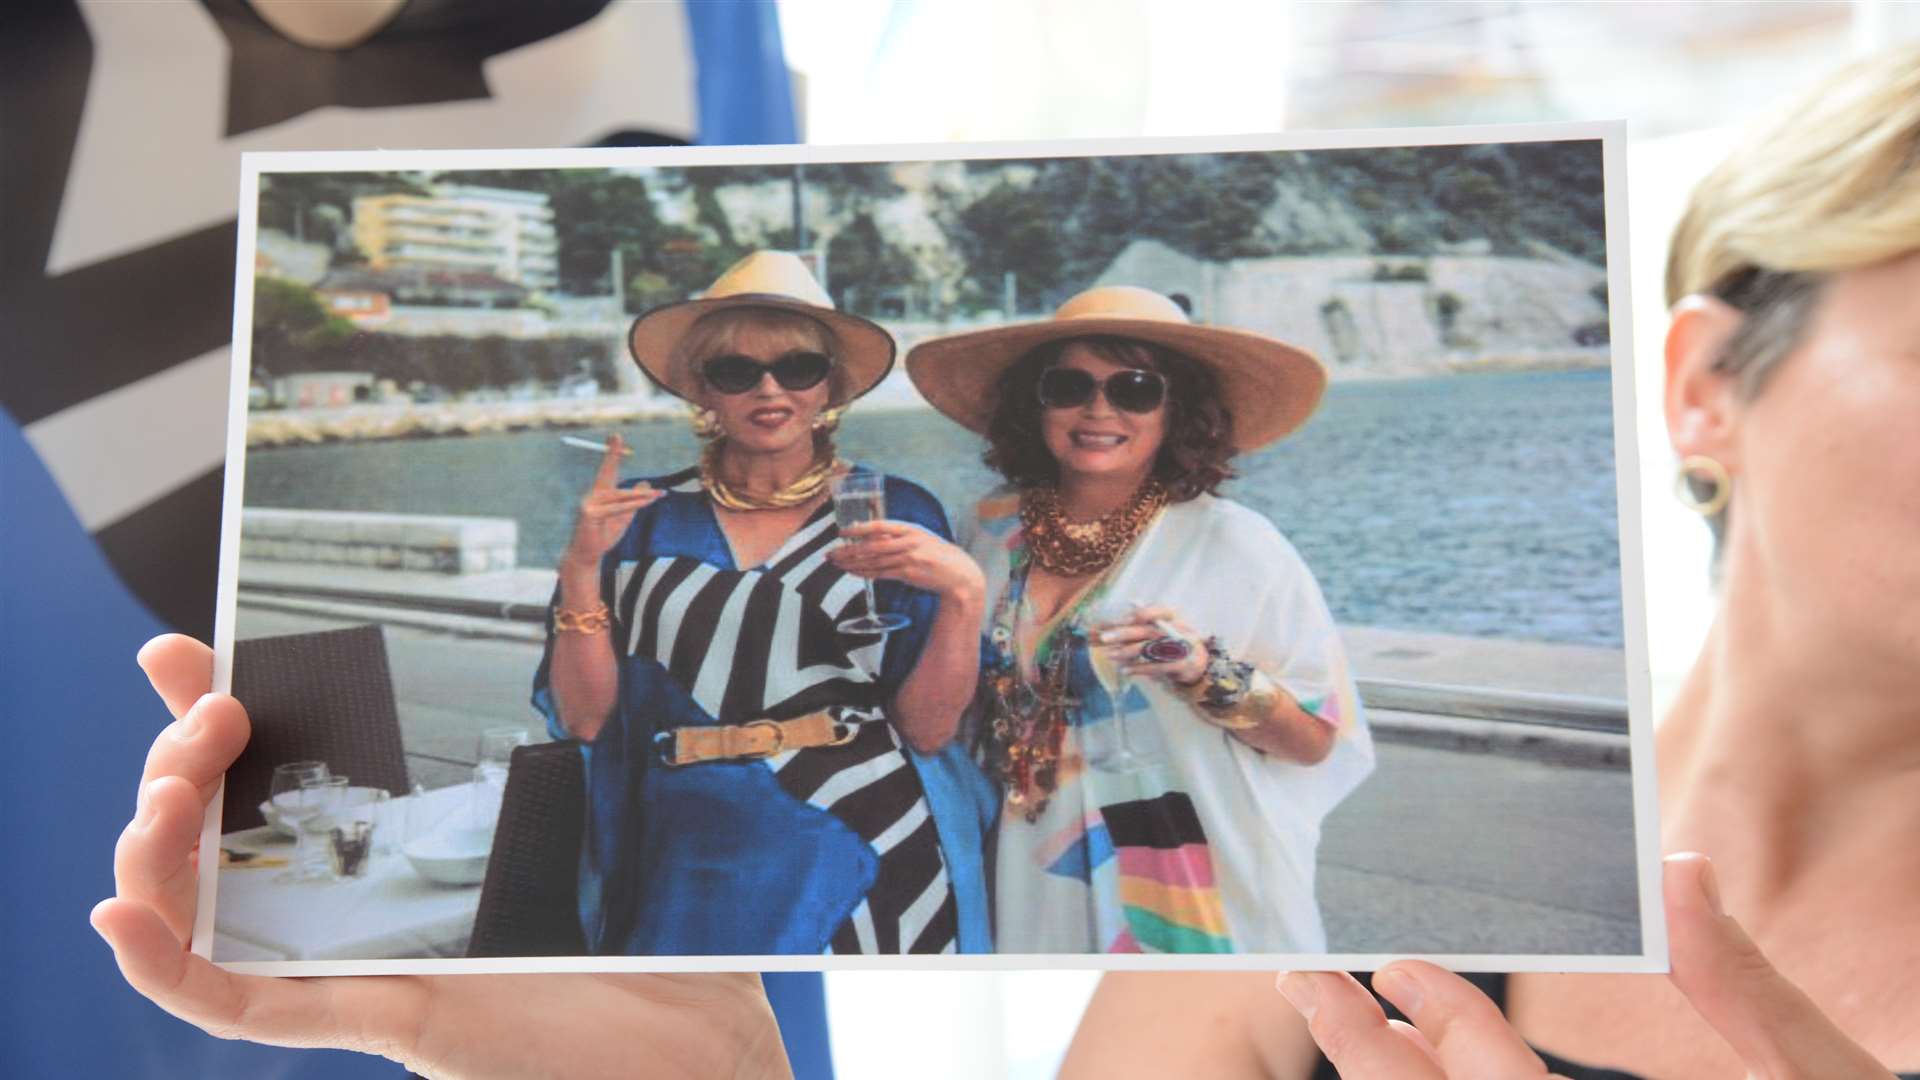 The picture of the Absolutely Fabulous duo wearing the kaftans is on display in Jean's shop